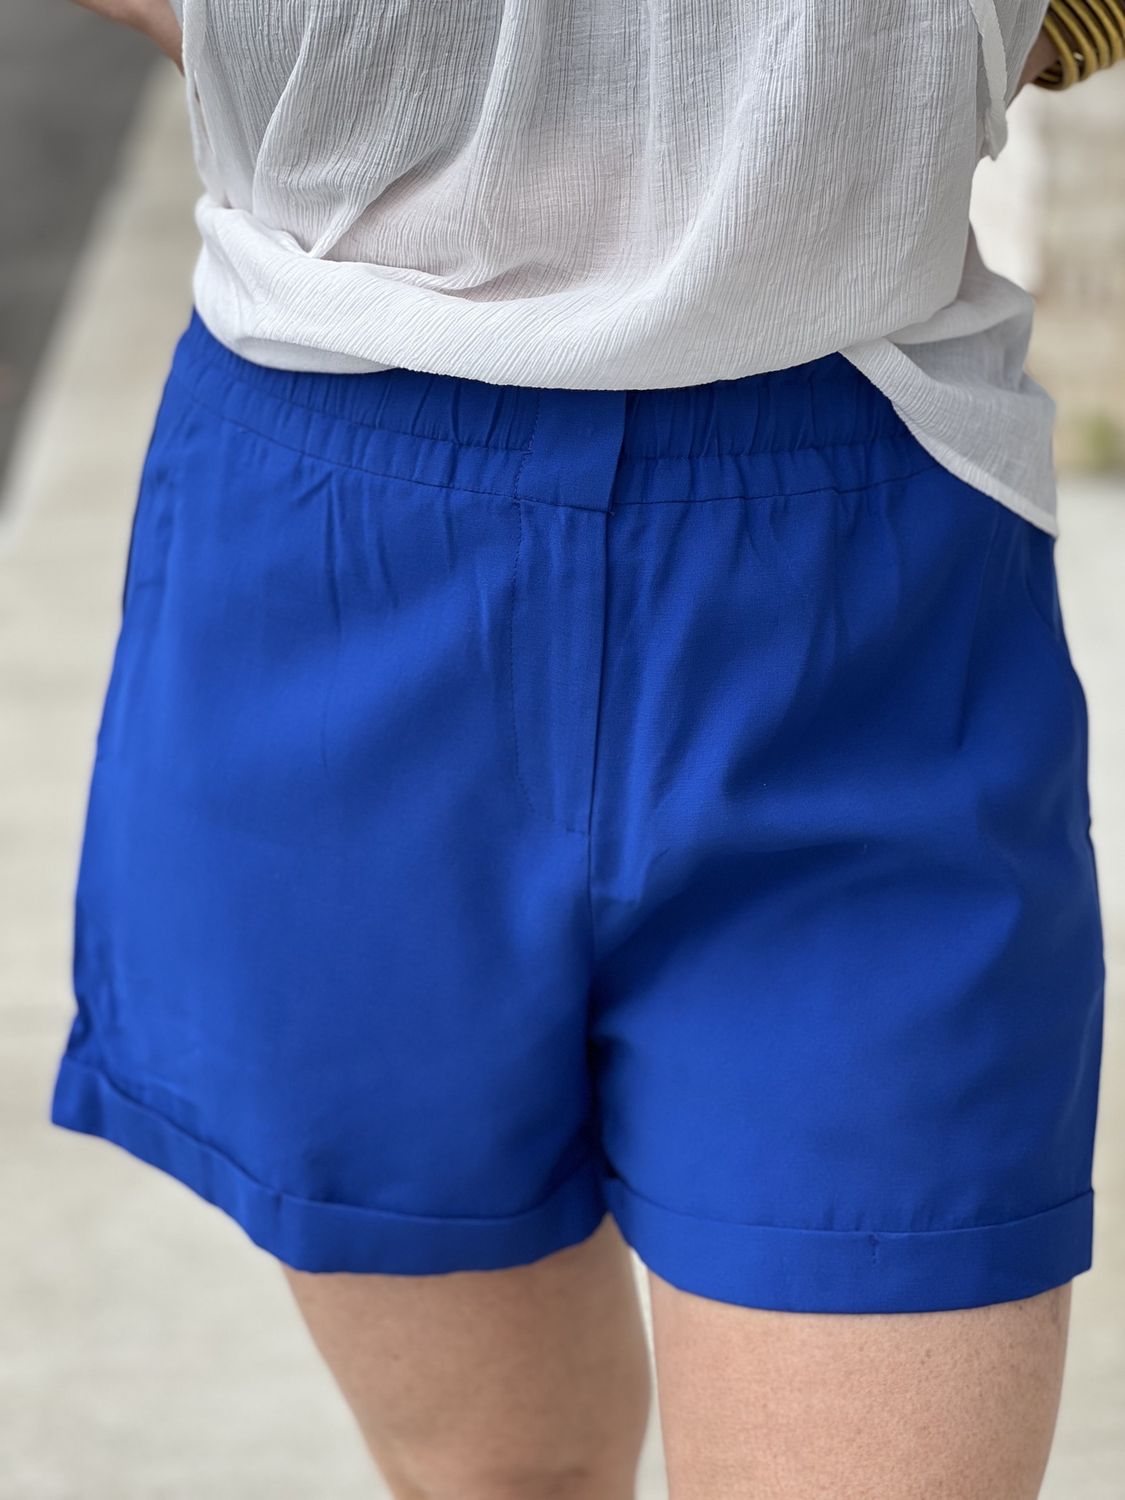 BLUE SHORTS, Size: SMALL